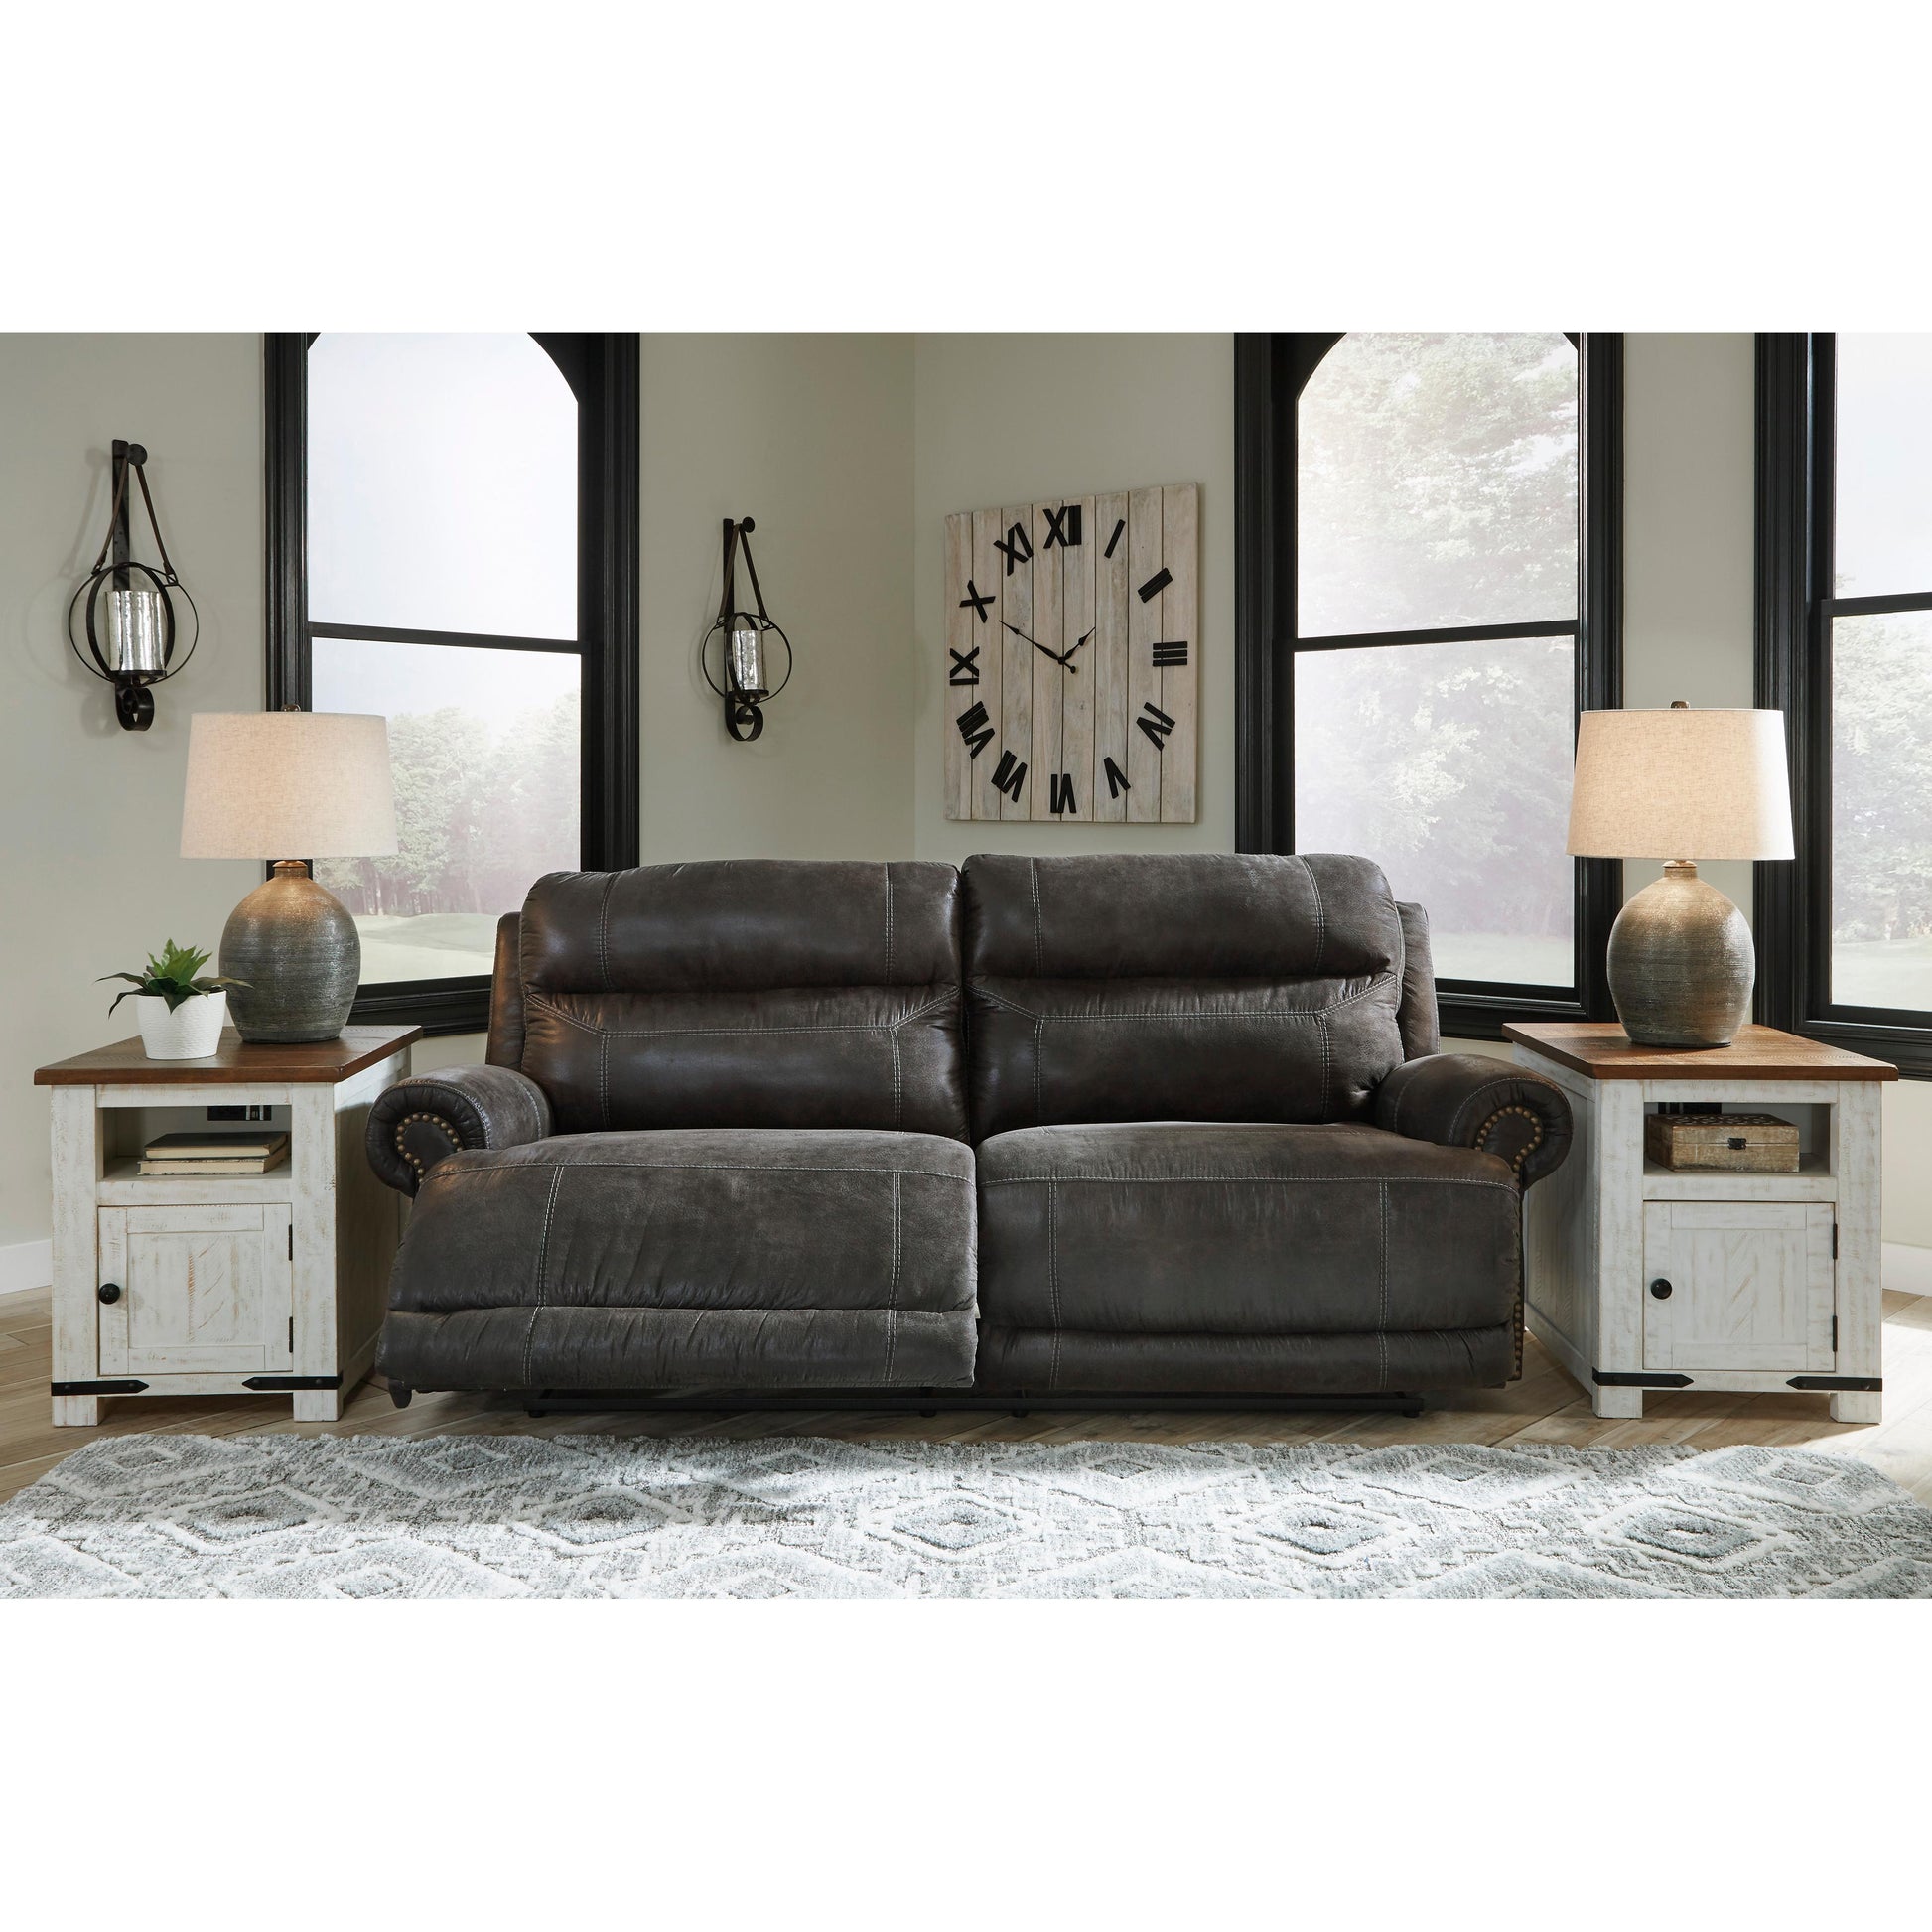 Signature Design by Ashley Grearview Power Reclining Leather Look Sofa 6500547